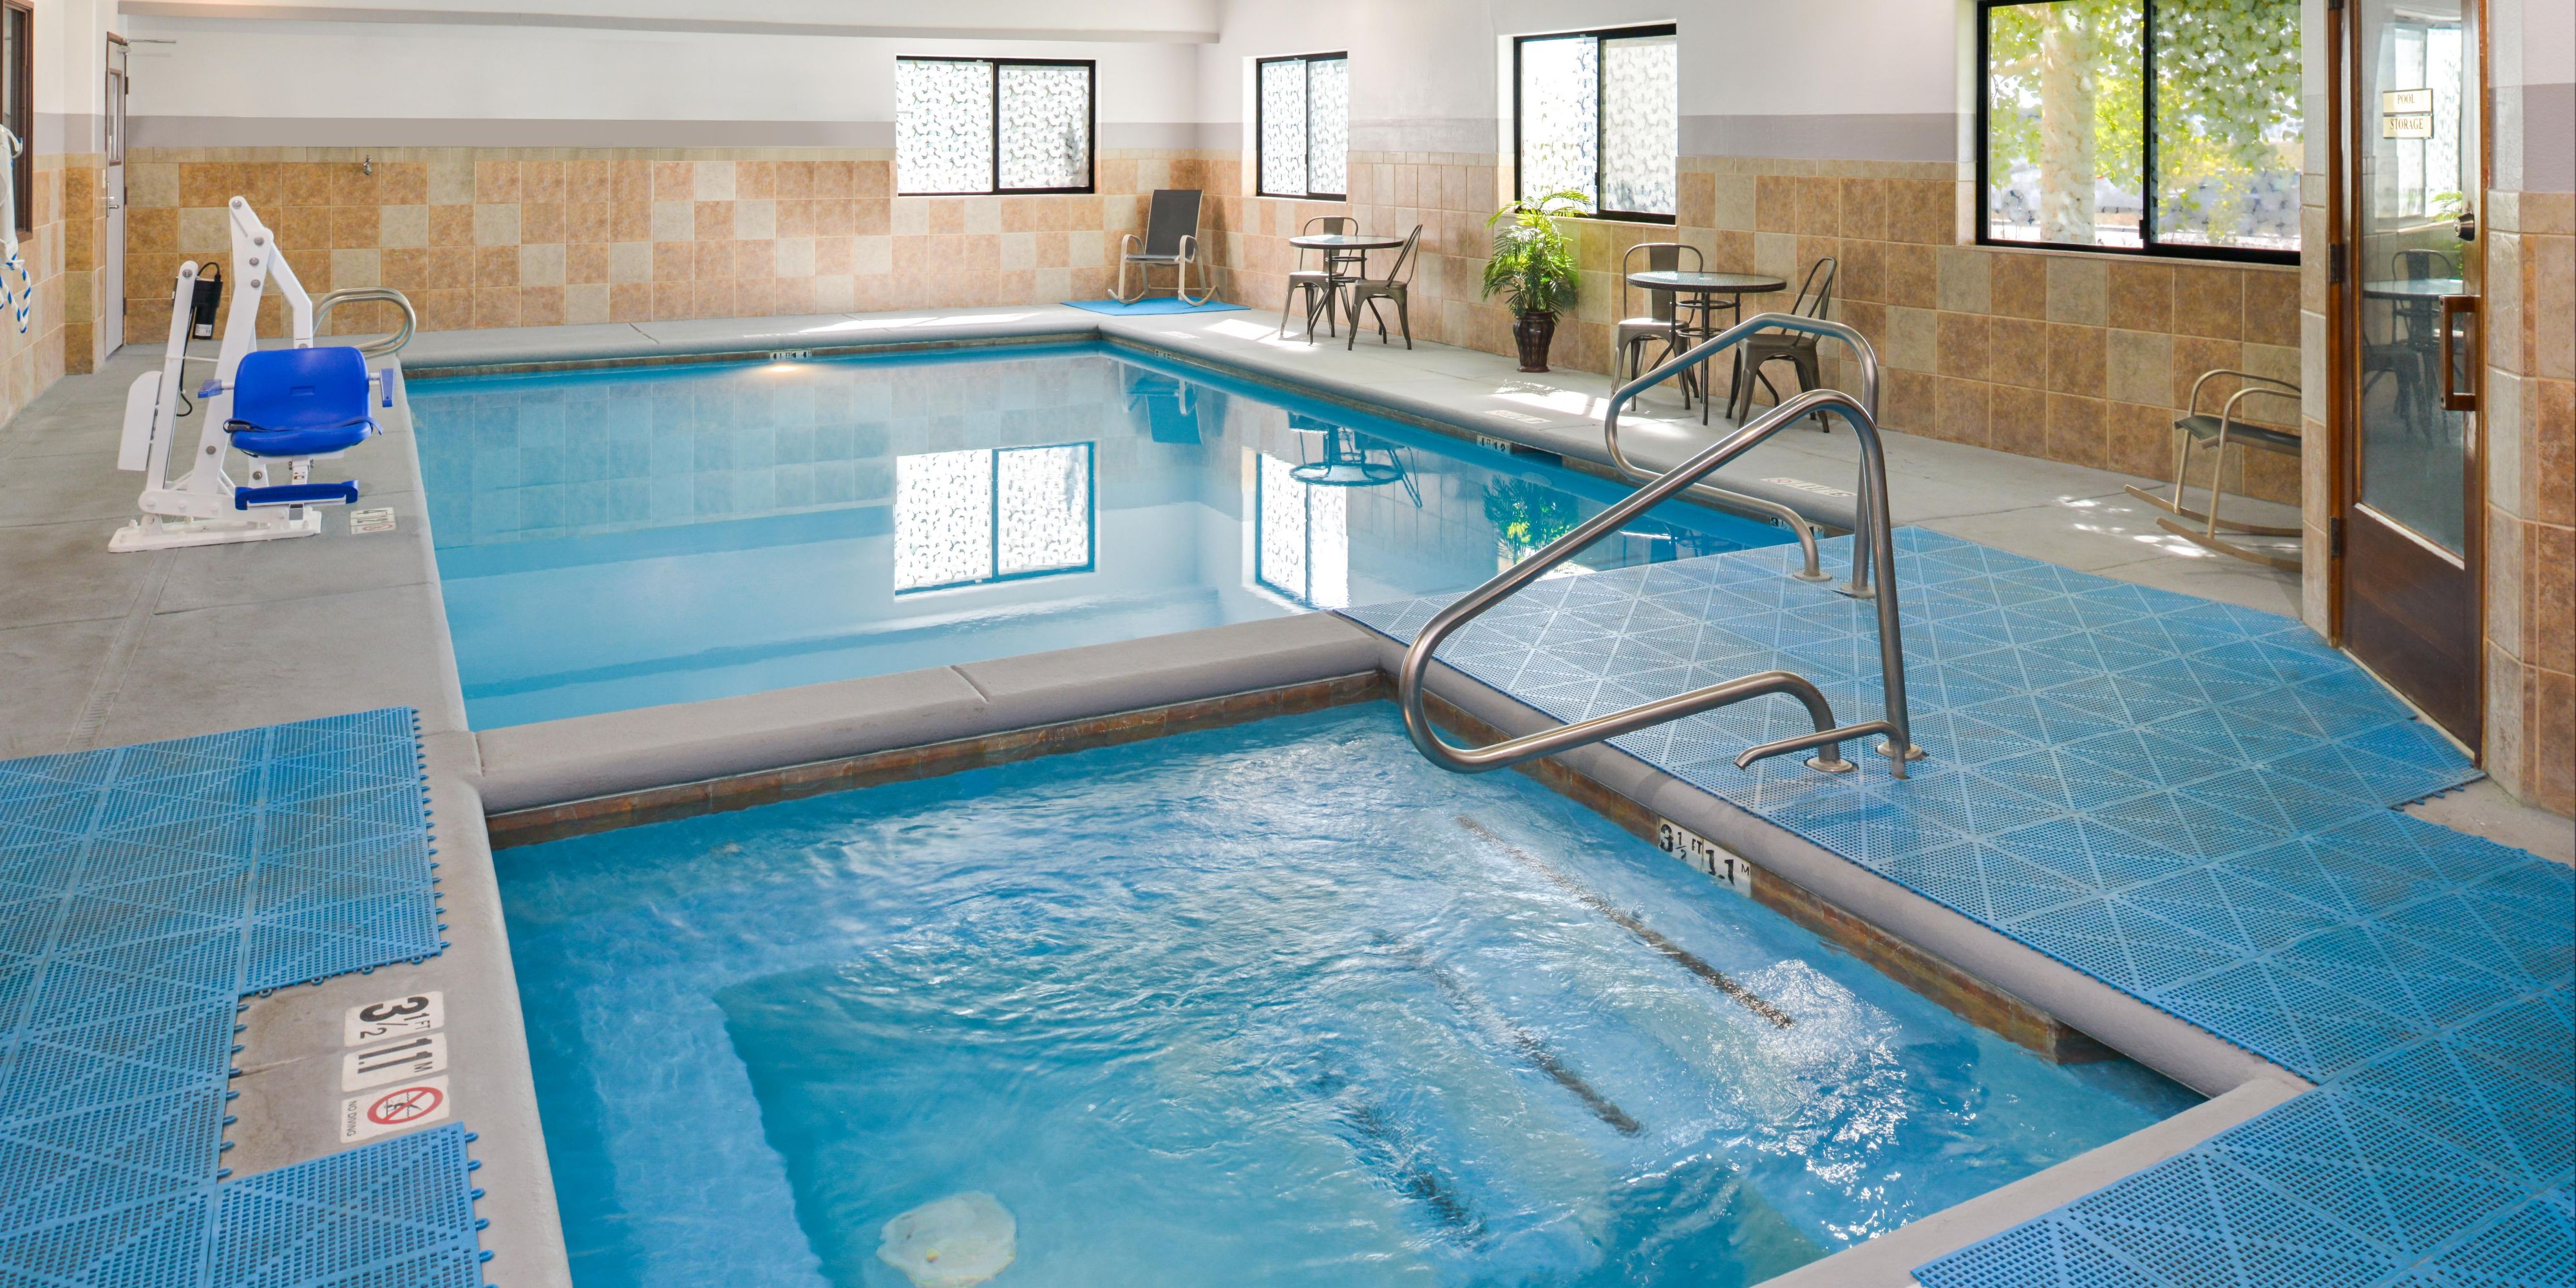 Come enjoy our Indoor swimming pool